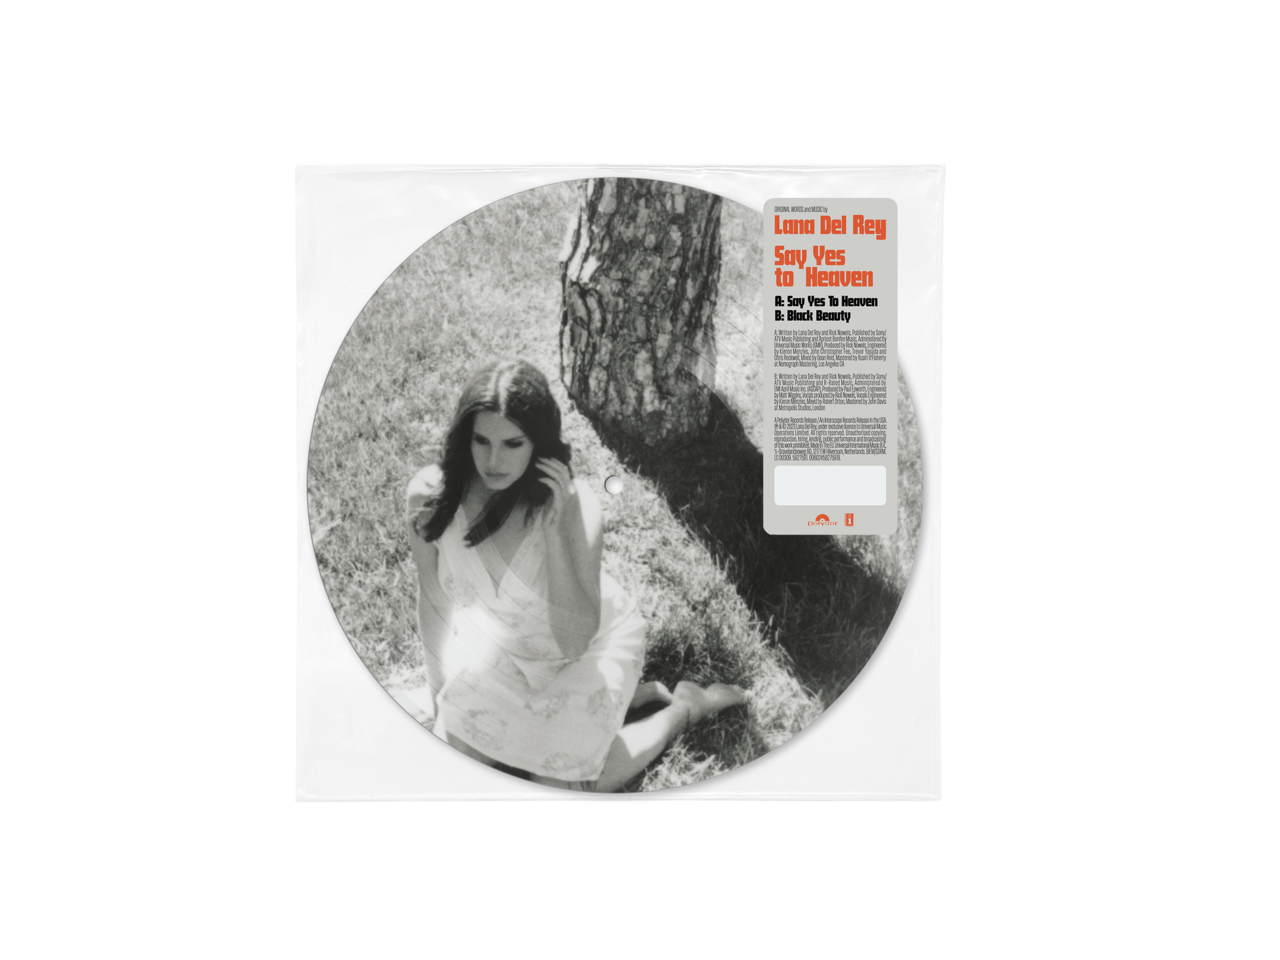 Limited Edition Say Yes To Heaven 7" Single Picture Disc - Lana Del Rey